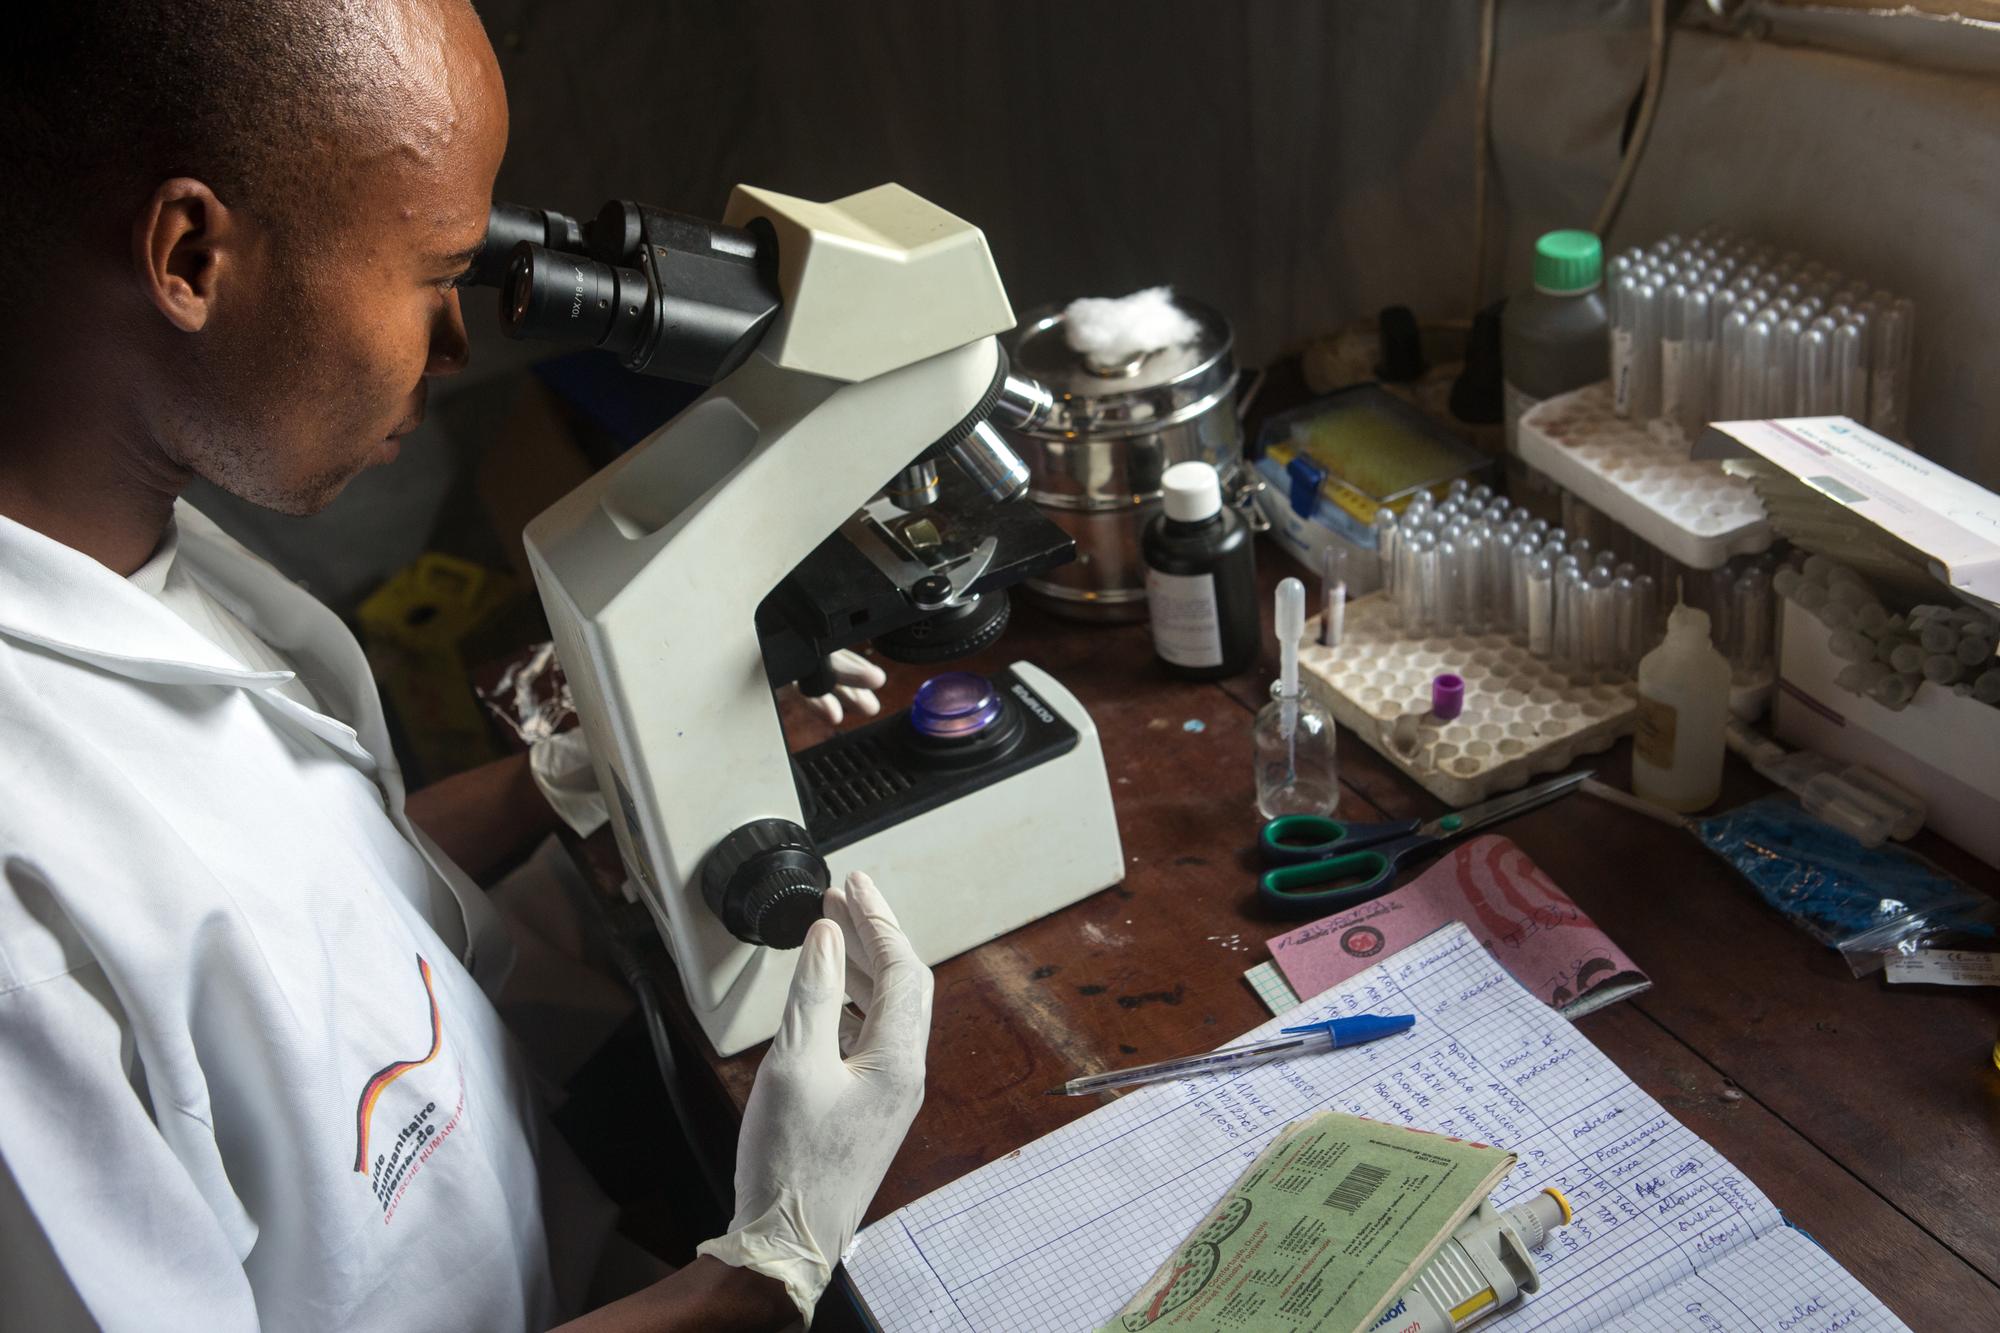 A lab technician at a wooden desk looks into a microscope.